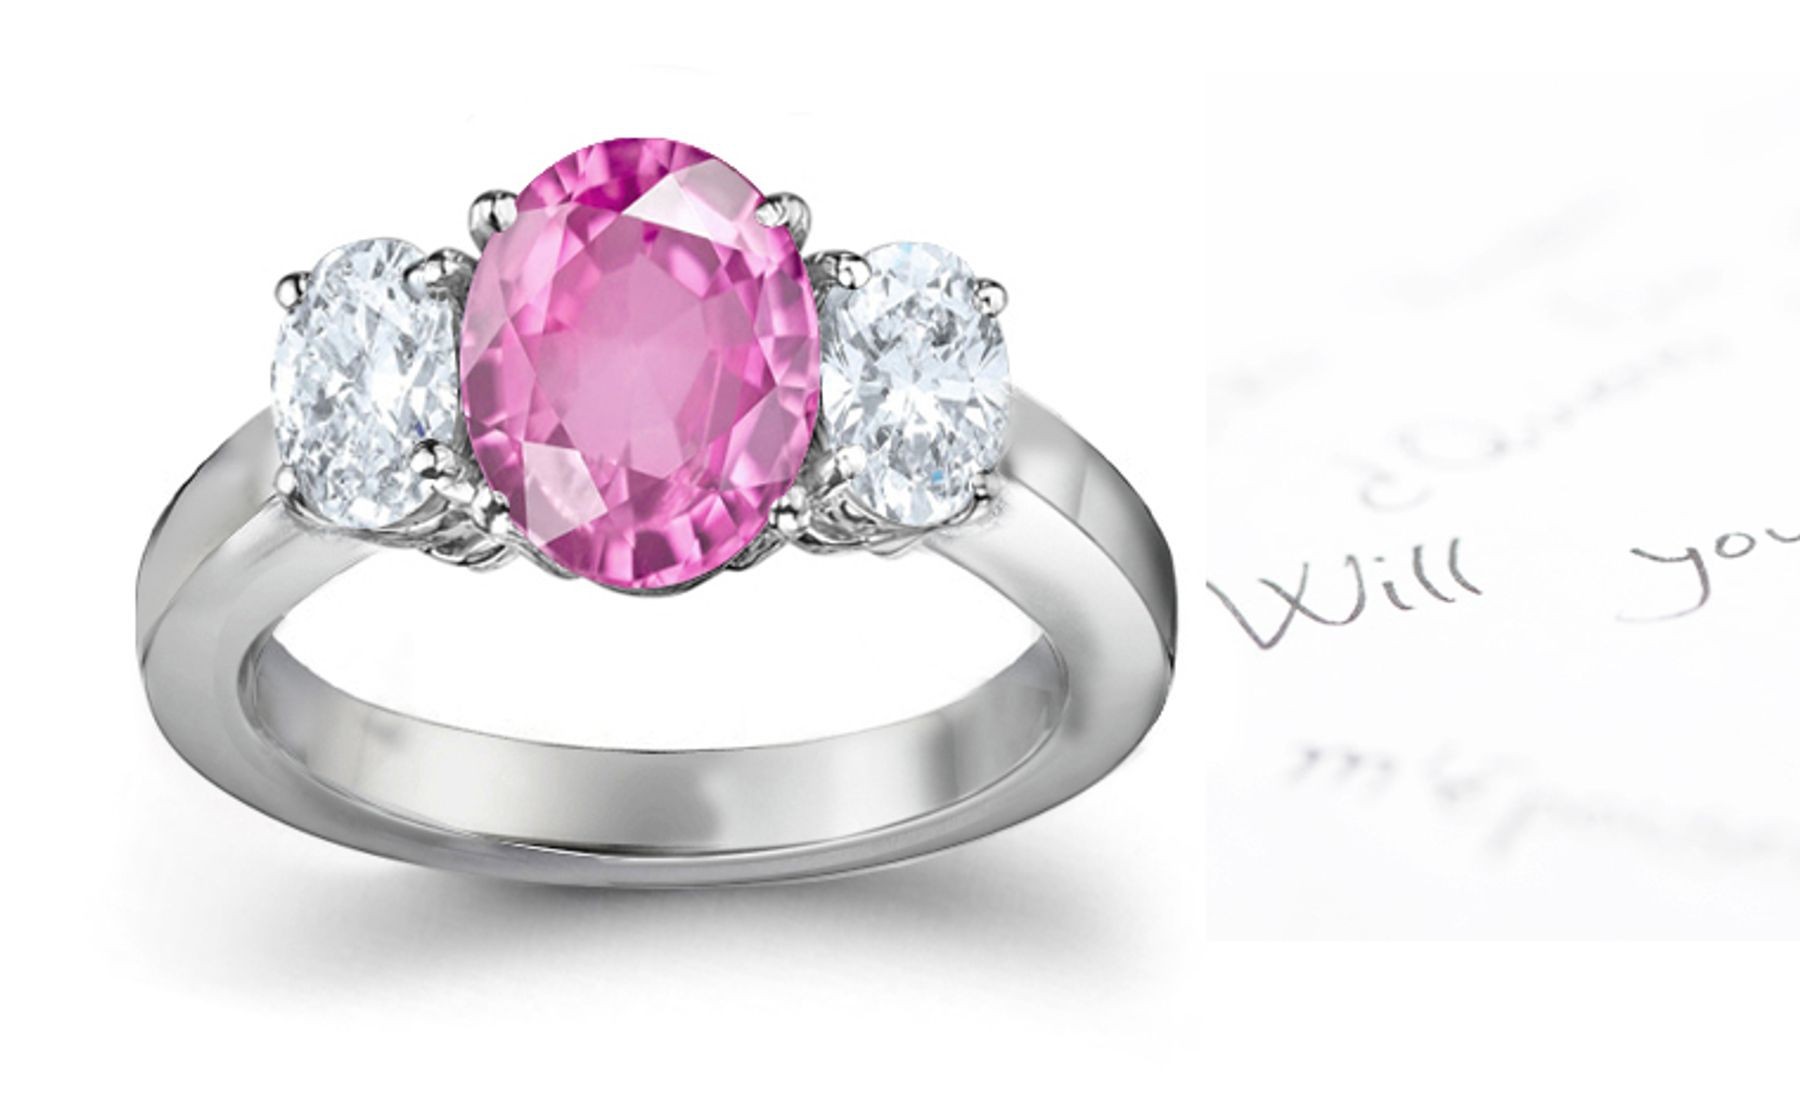 Stunning Pink Sapphire & Fancy Diamond Engagement Ring Availability